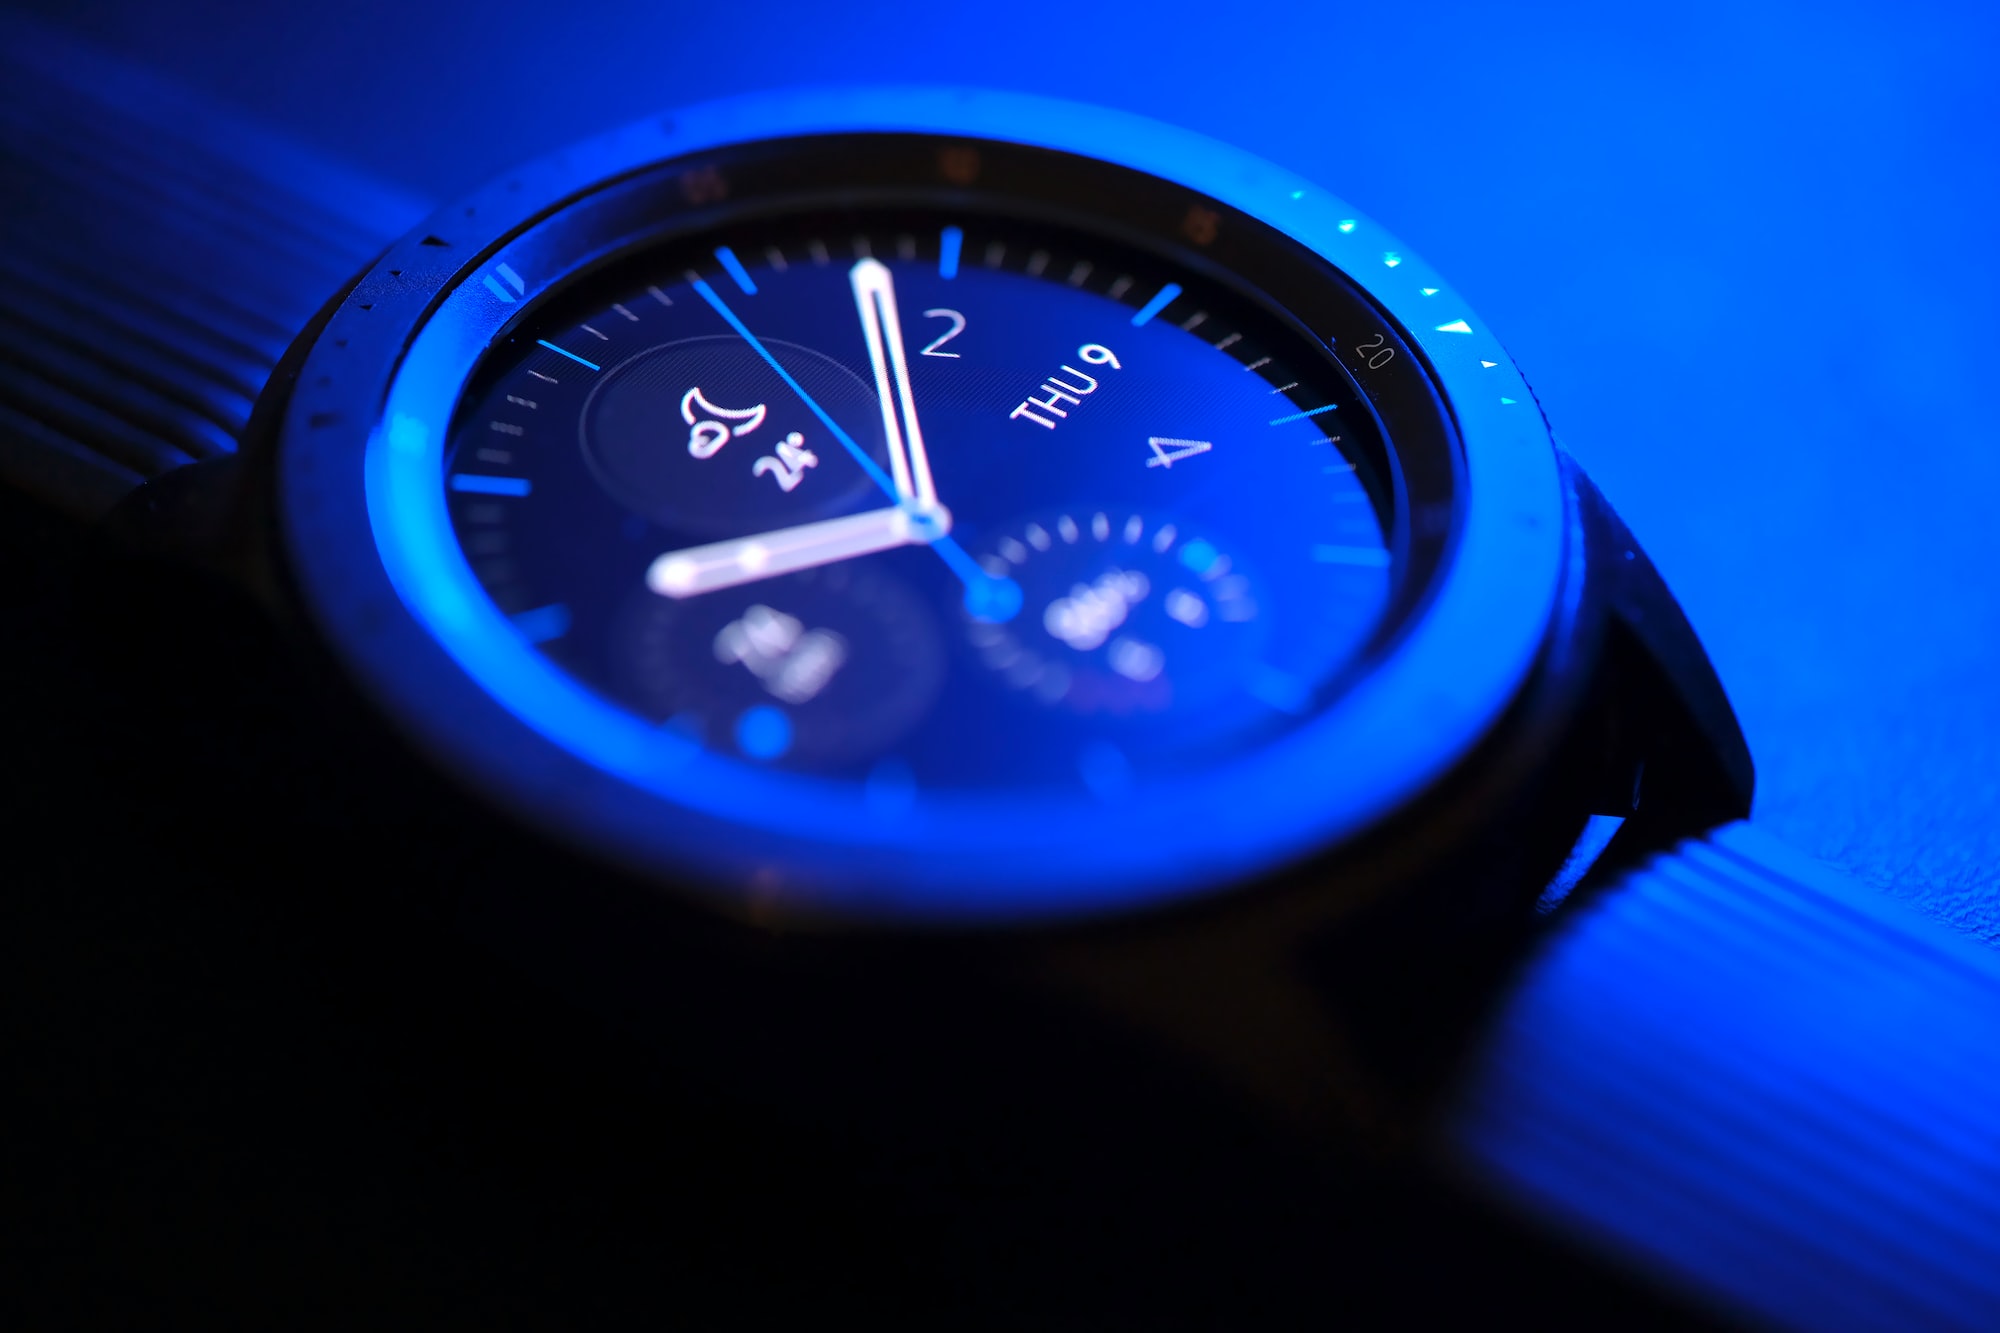 Know the accuracy of the Galaxy Smartwatch counter?